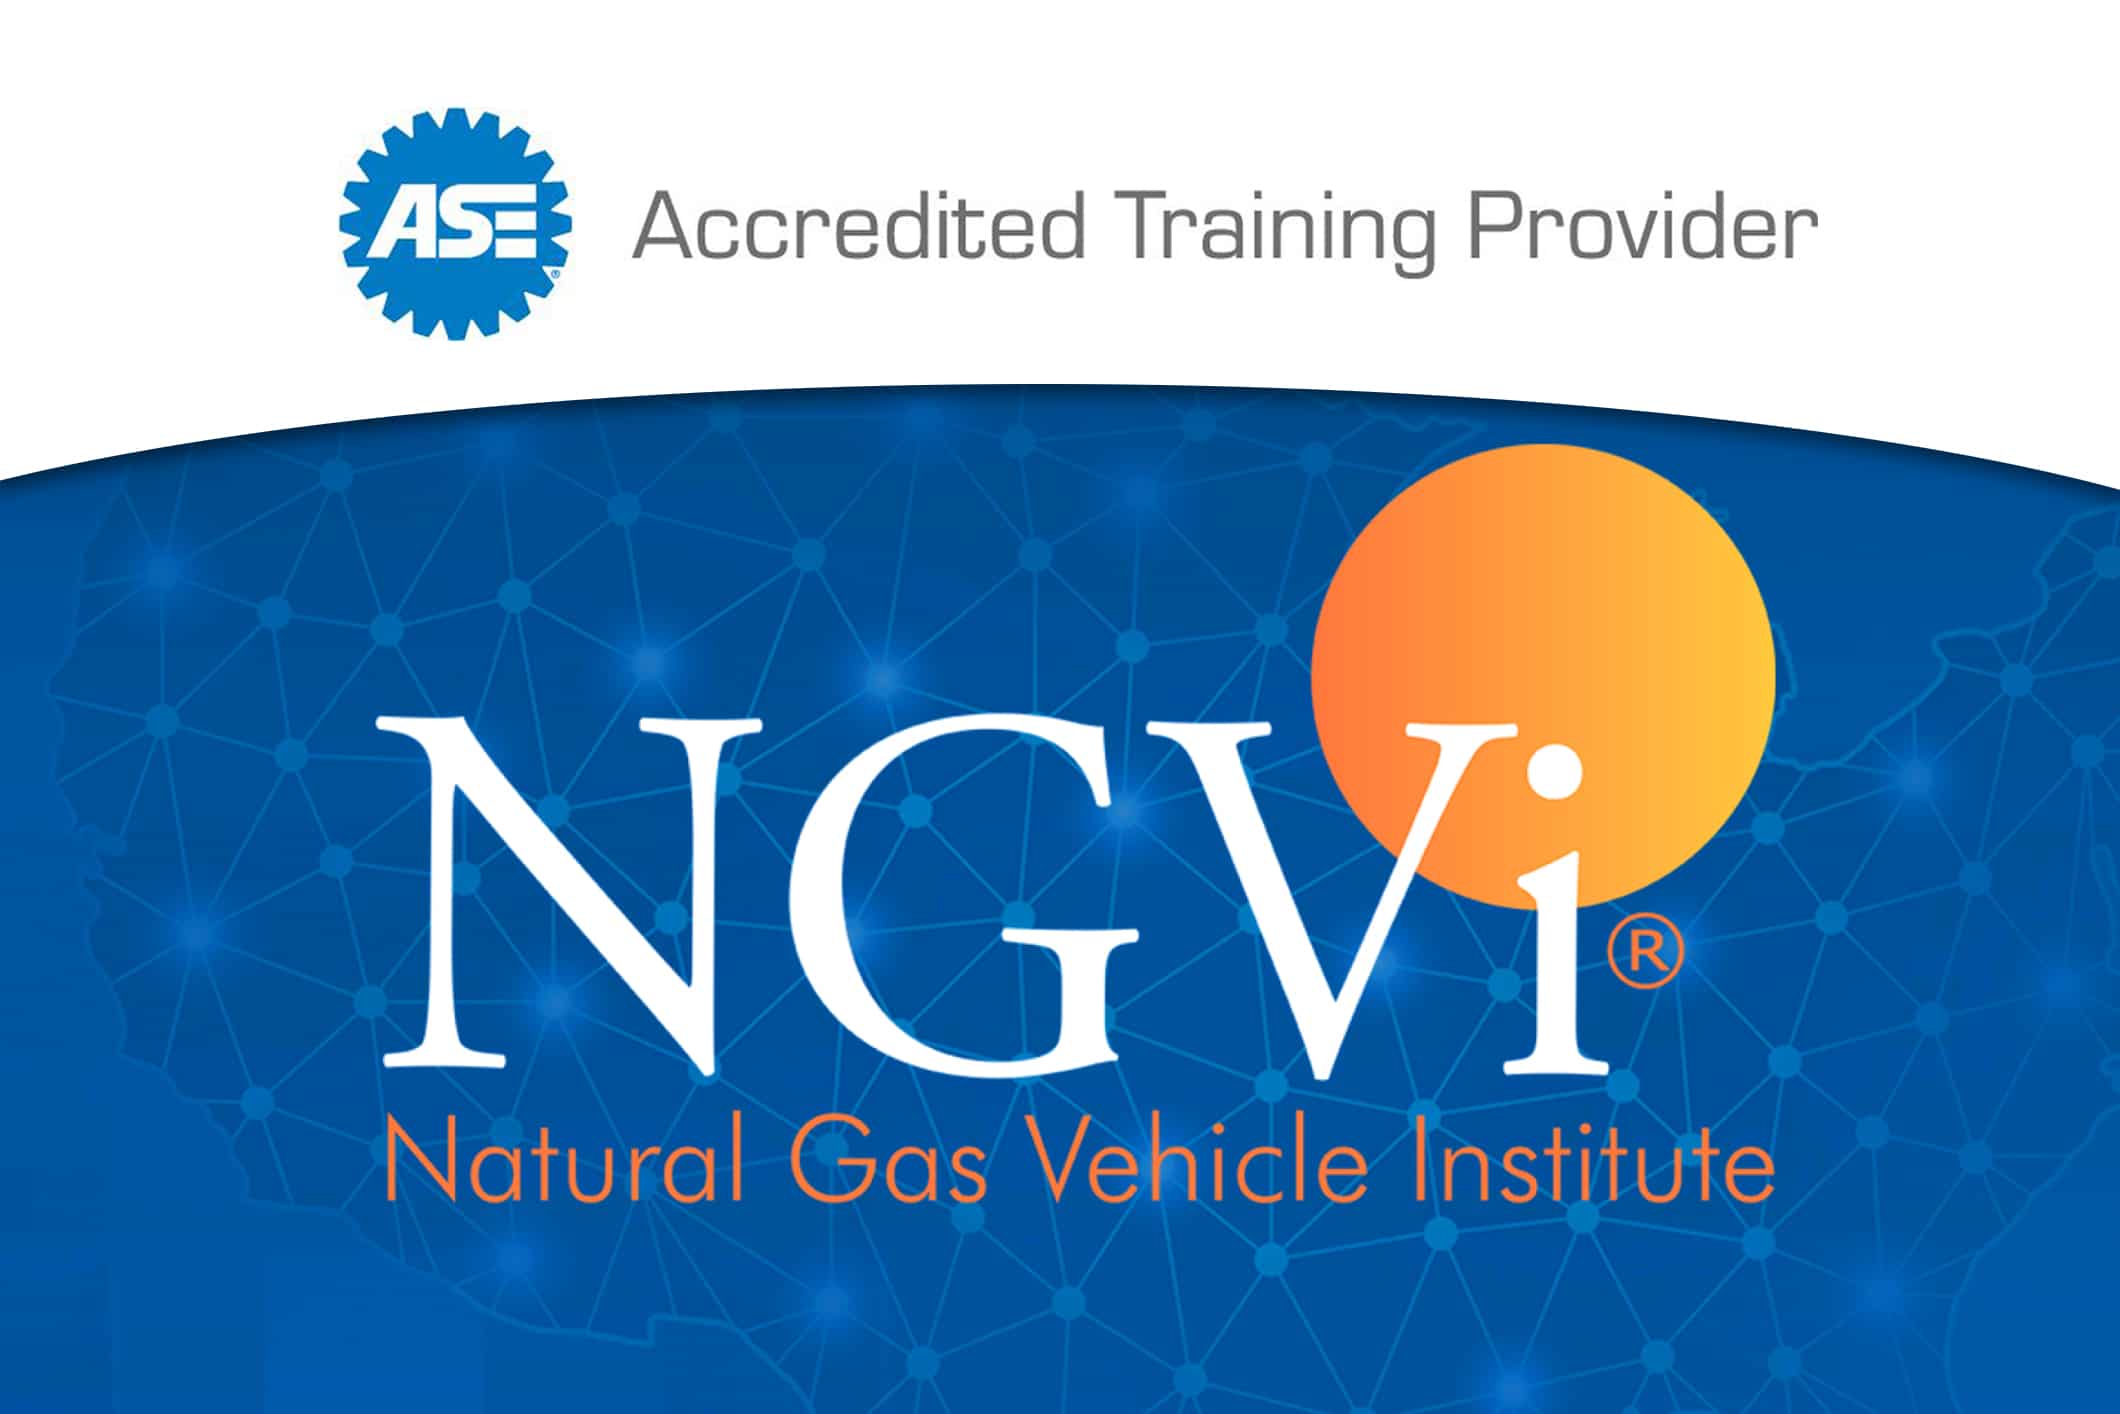 The NGVi logo and ASE Accredited Training Provider badge.